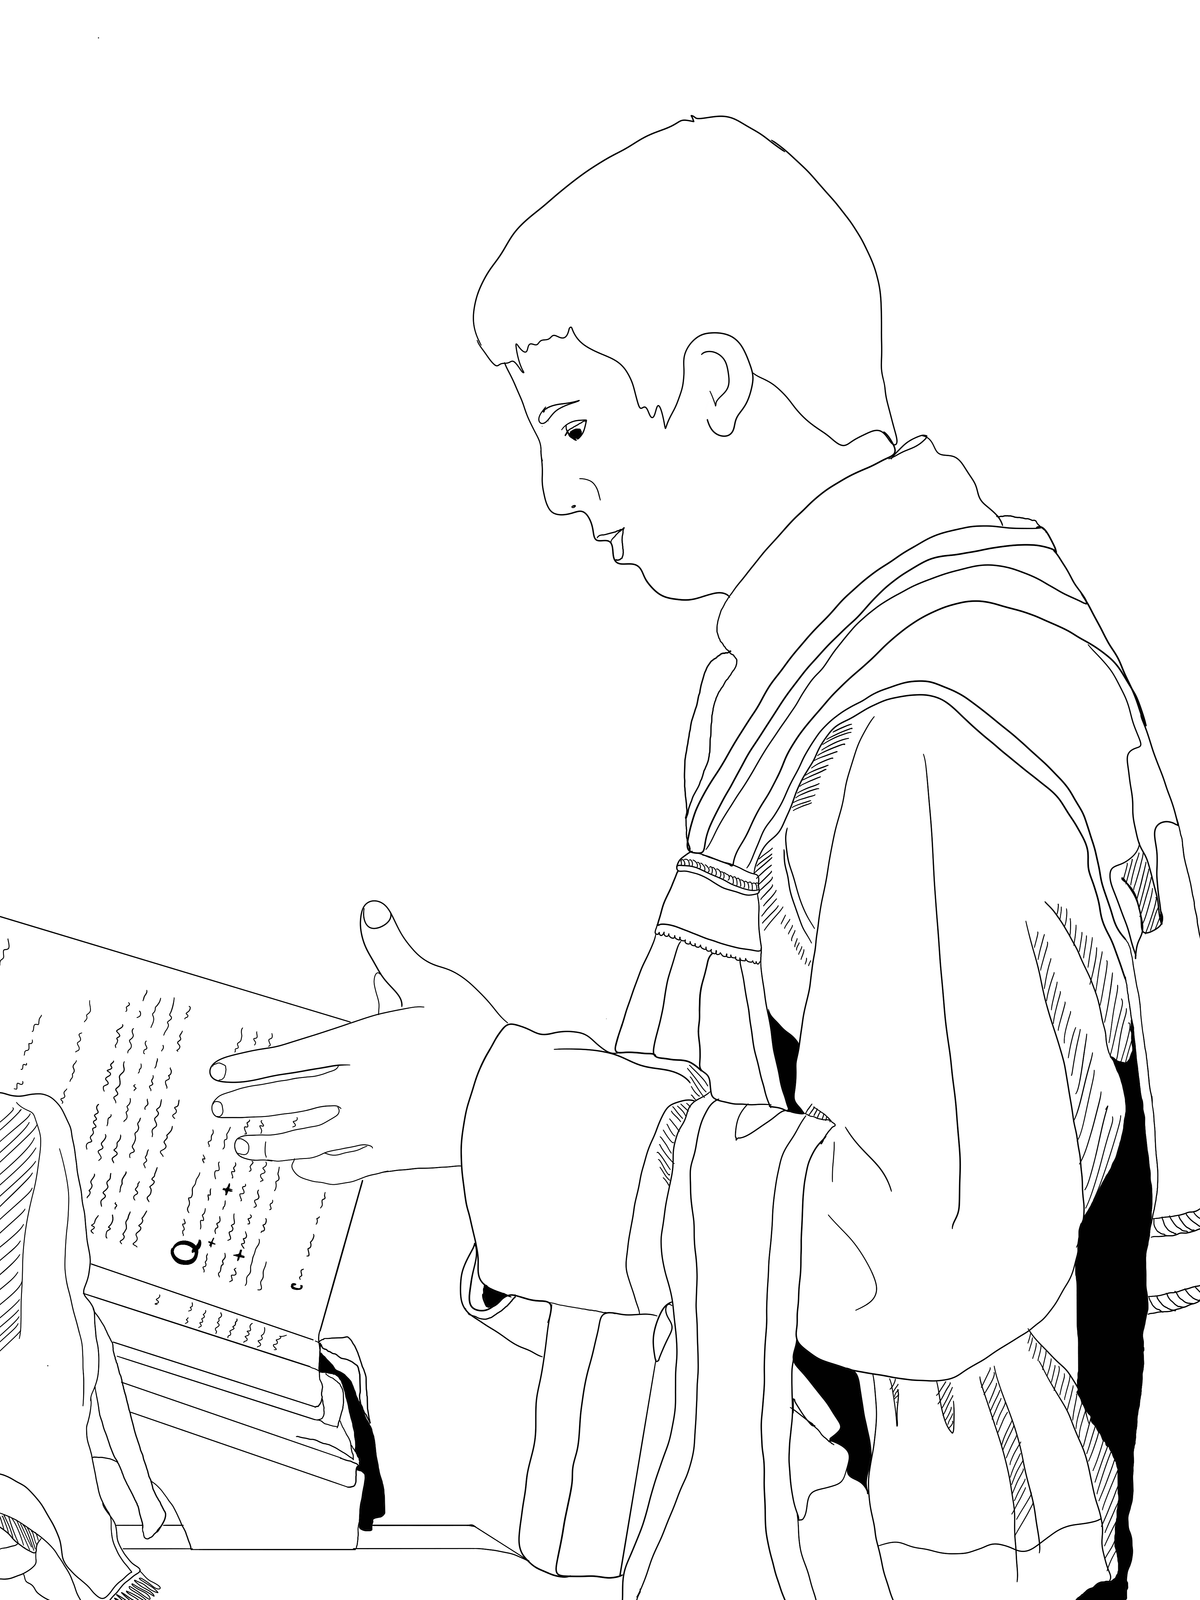 Introit During Latin Mass - Catholic Coloring Page